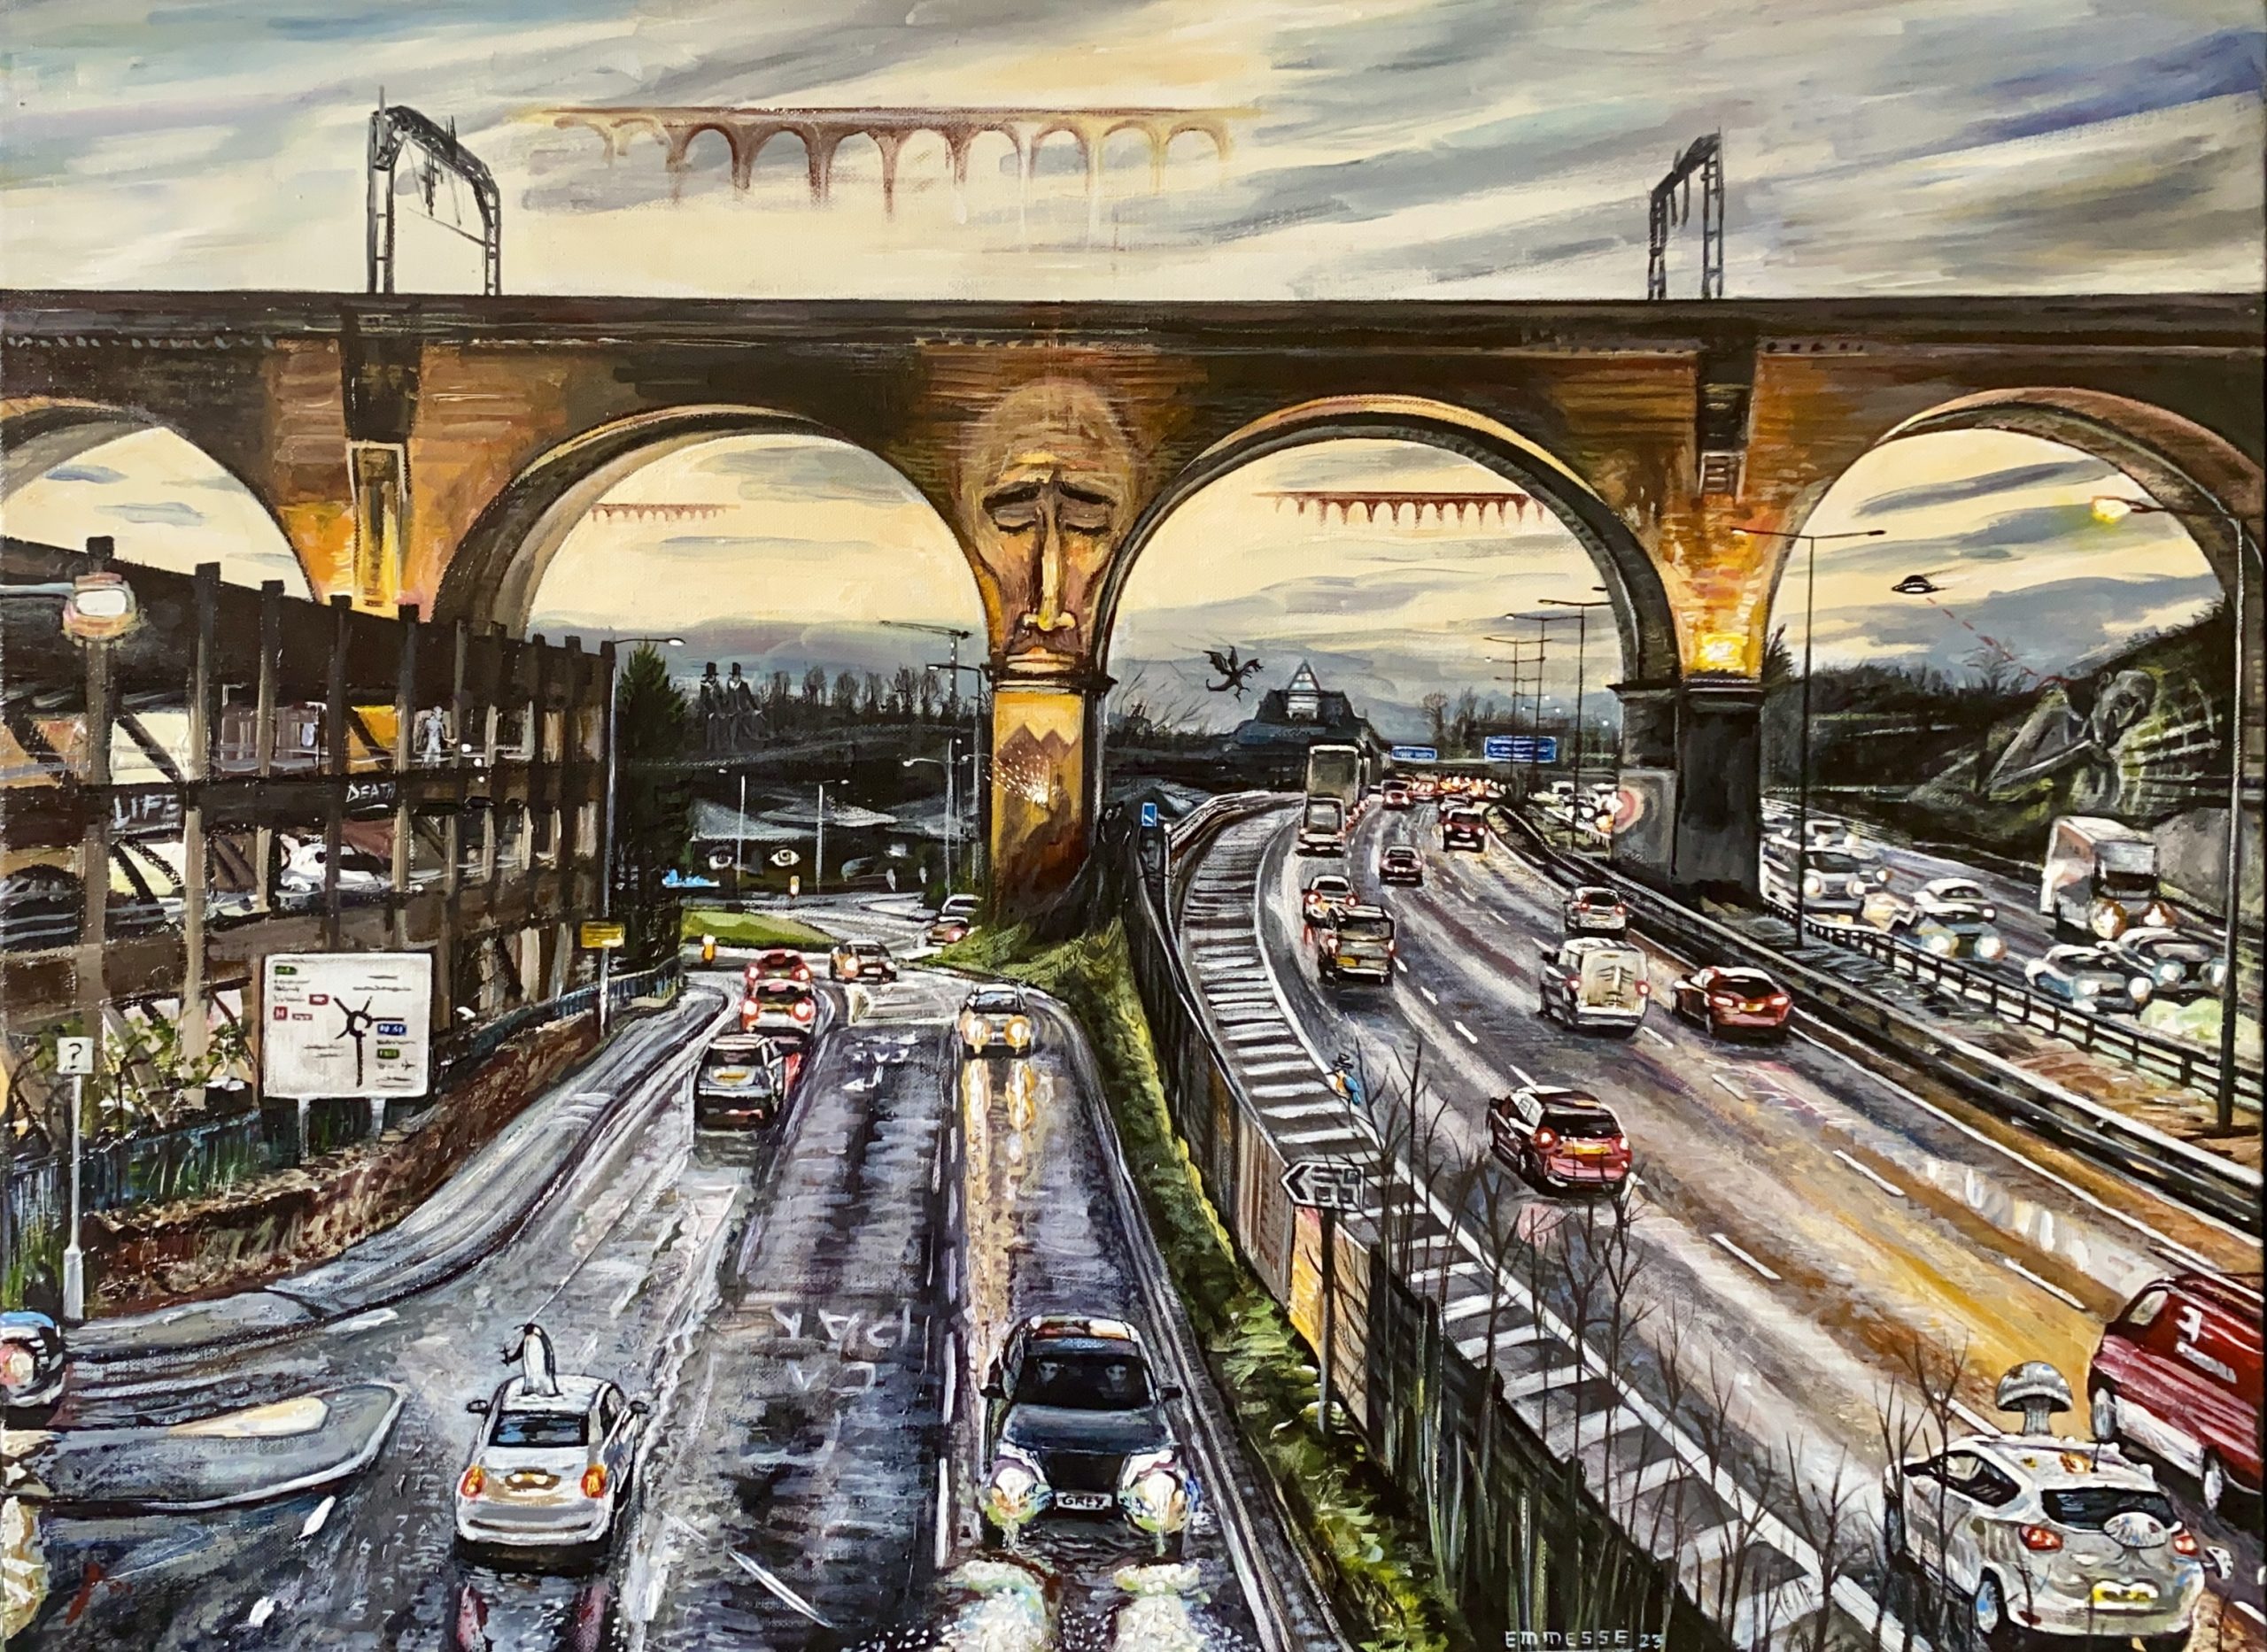 Emmesse (Michael Smith) - An Evening Stroll under Stockport Viaduct - acrylic on canvas 60x80cm £850